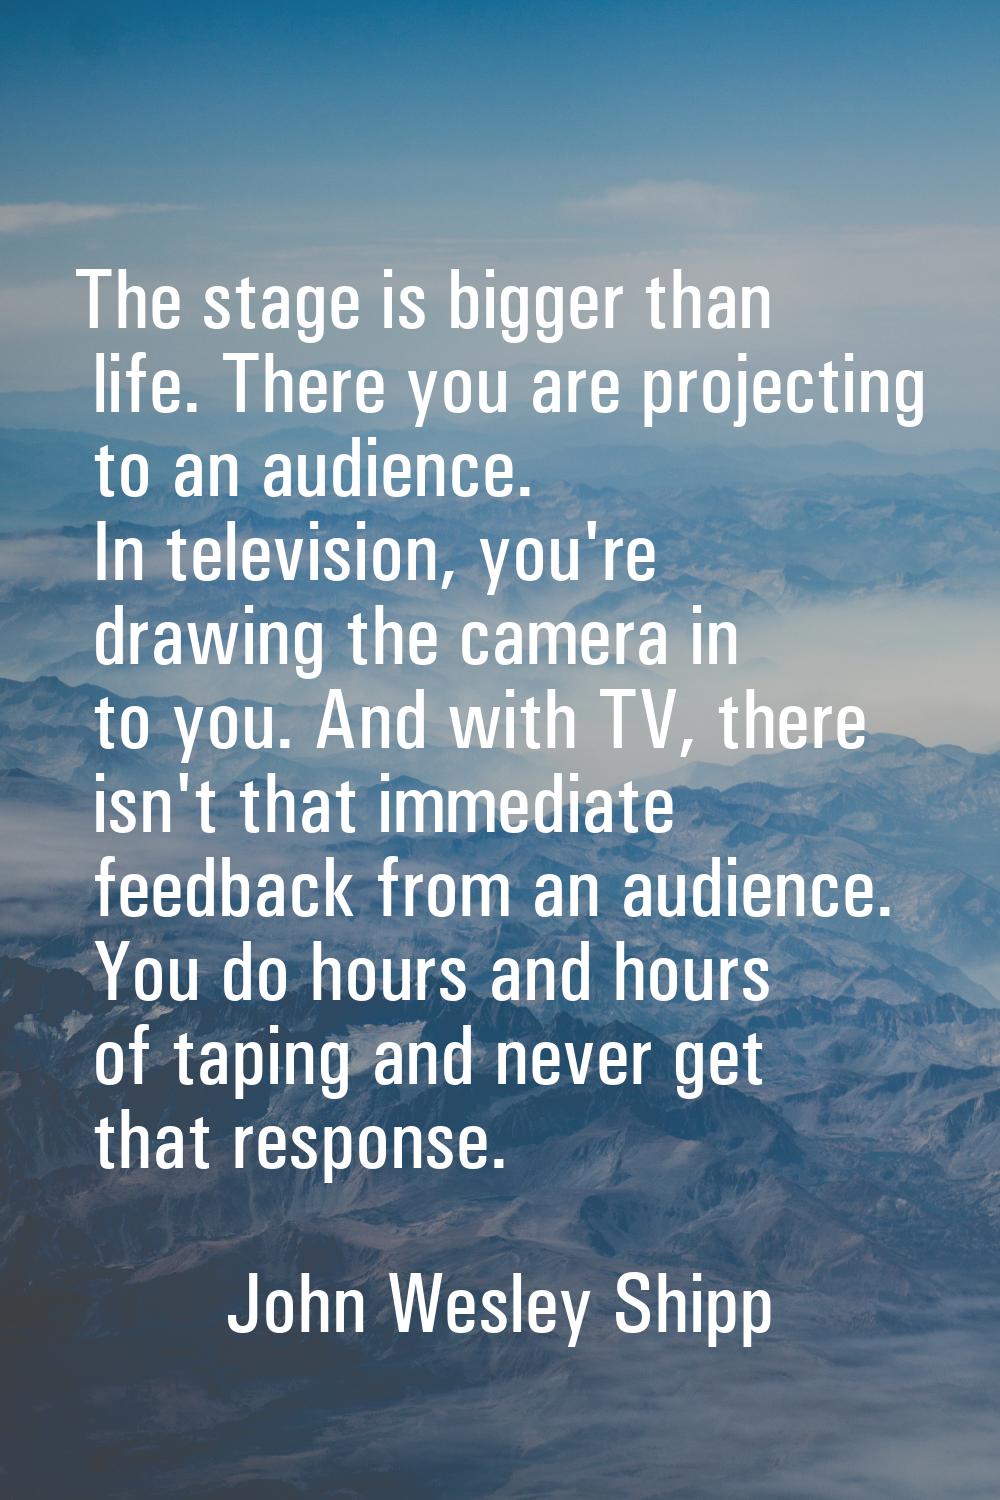 The stage is bigger than life. There you are projecting to an audience. In television, you're drawi